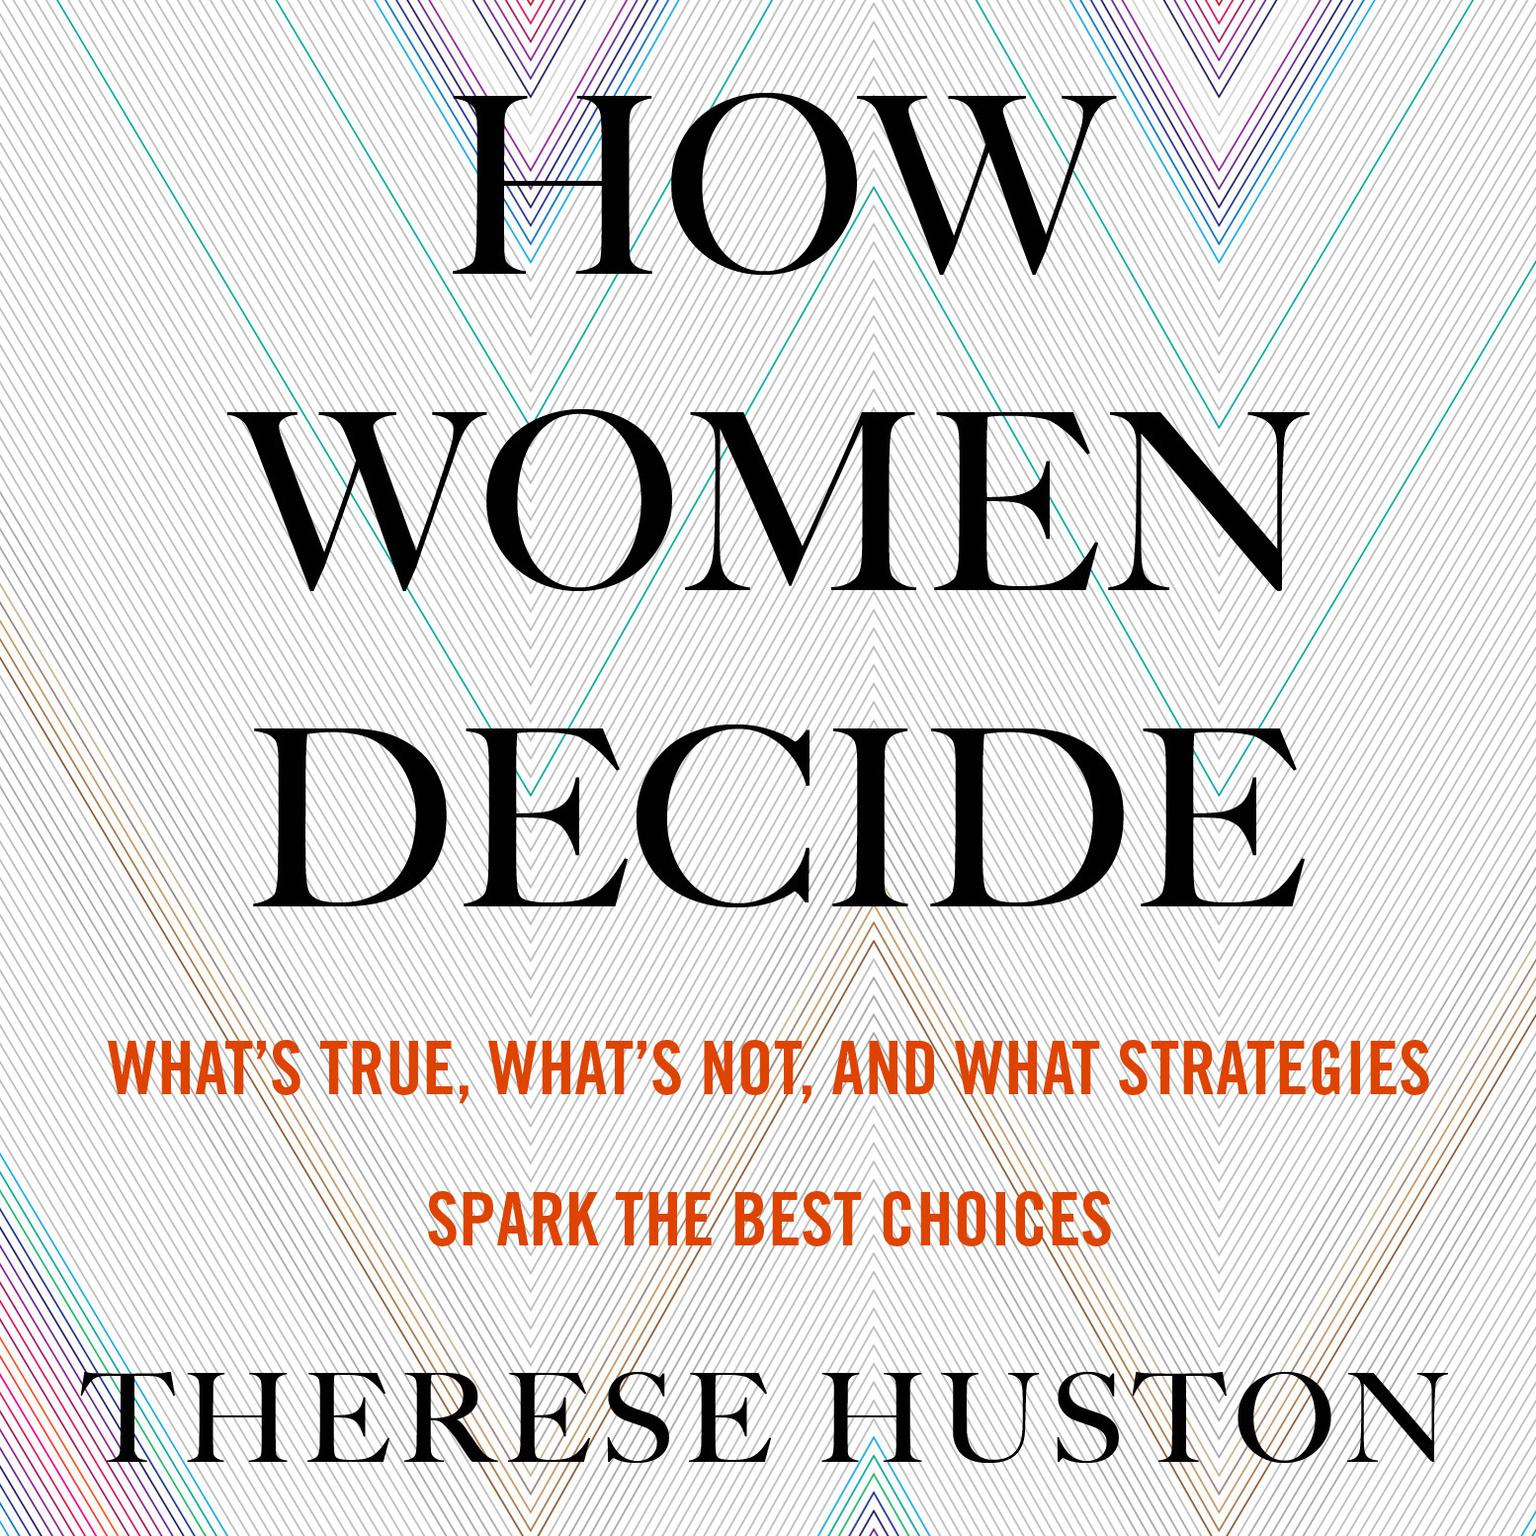 How Women Decide: Whats True, Whats Not, and What Strategies Spark the Best Choices Audiobook, by Therese Huston